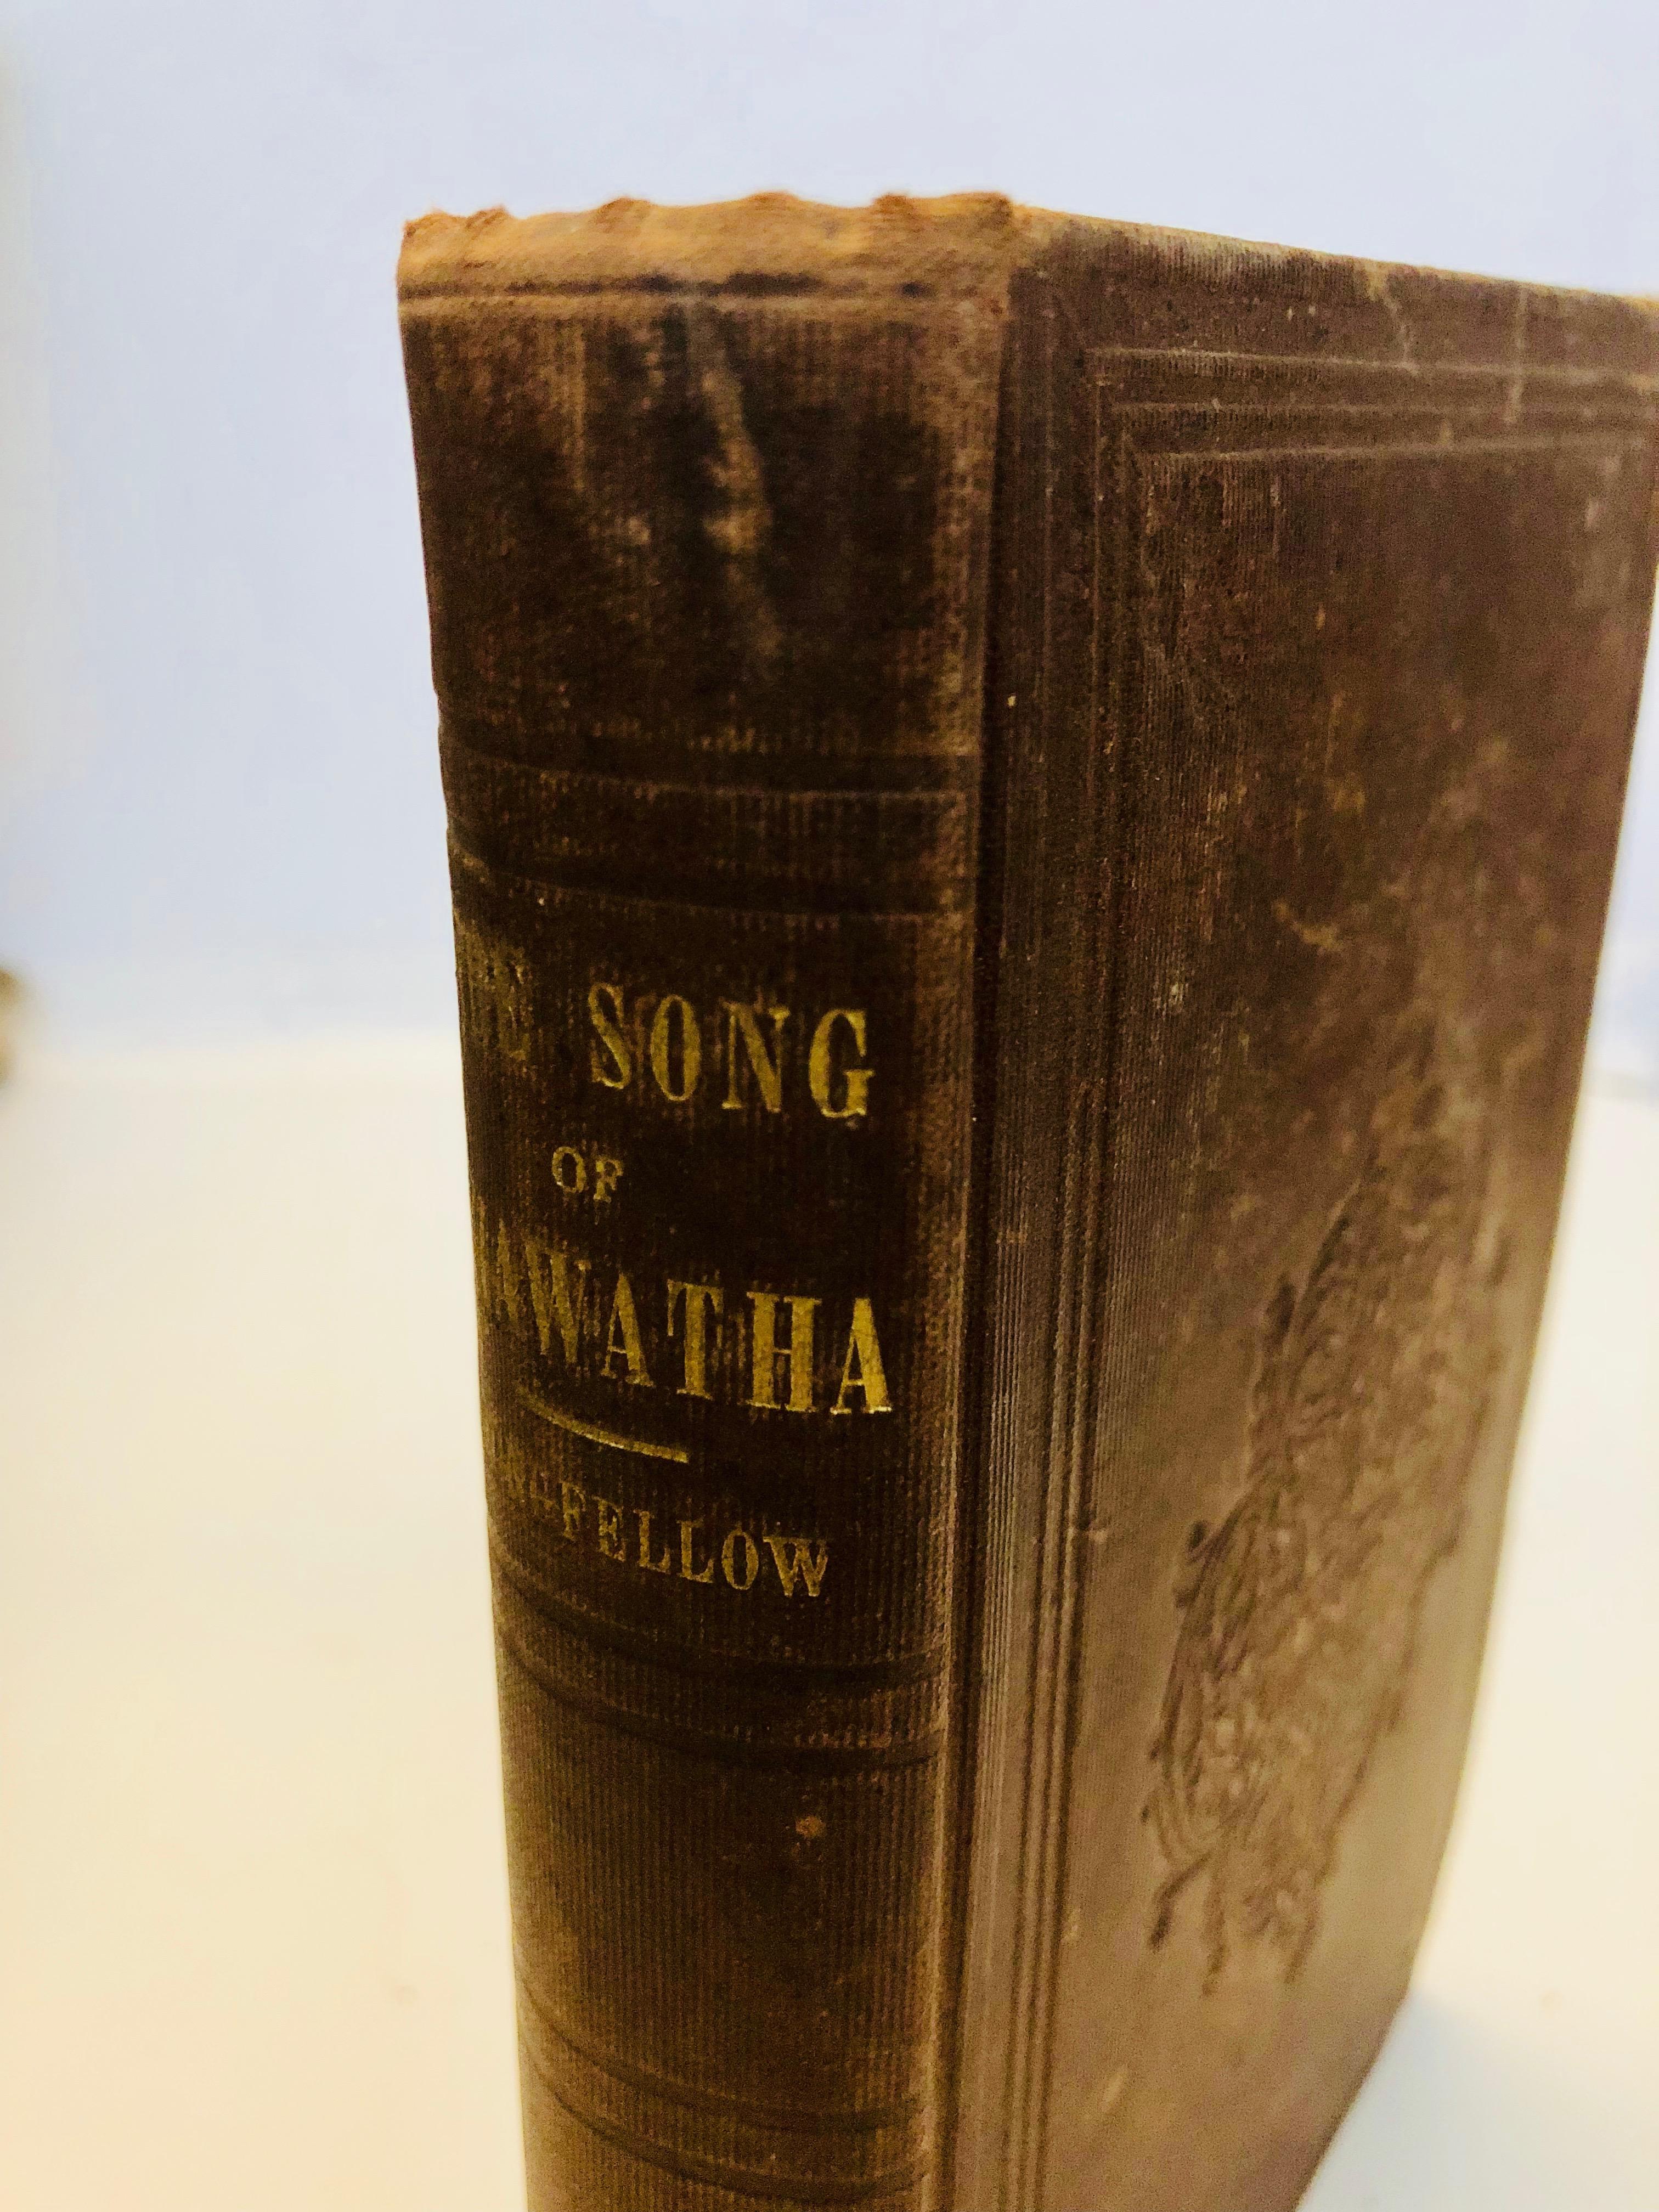 The Song of Hiawatha by Henry Wadswoth Longfellow (1856)